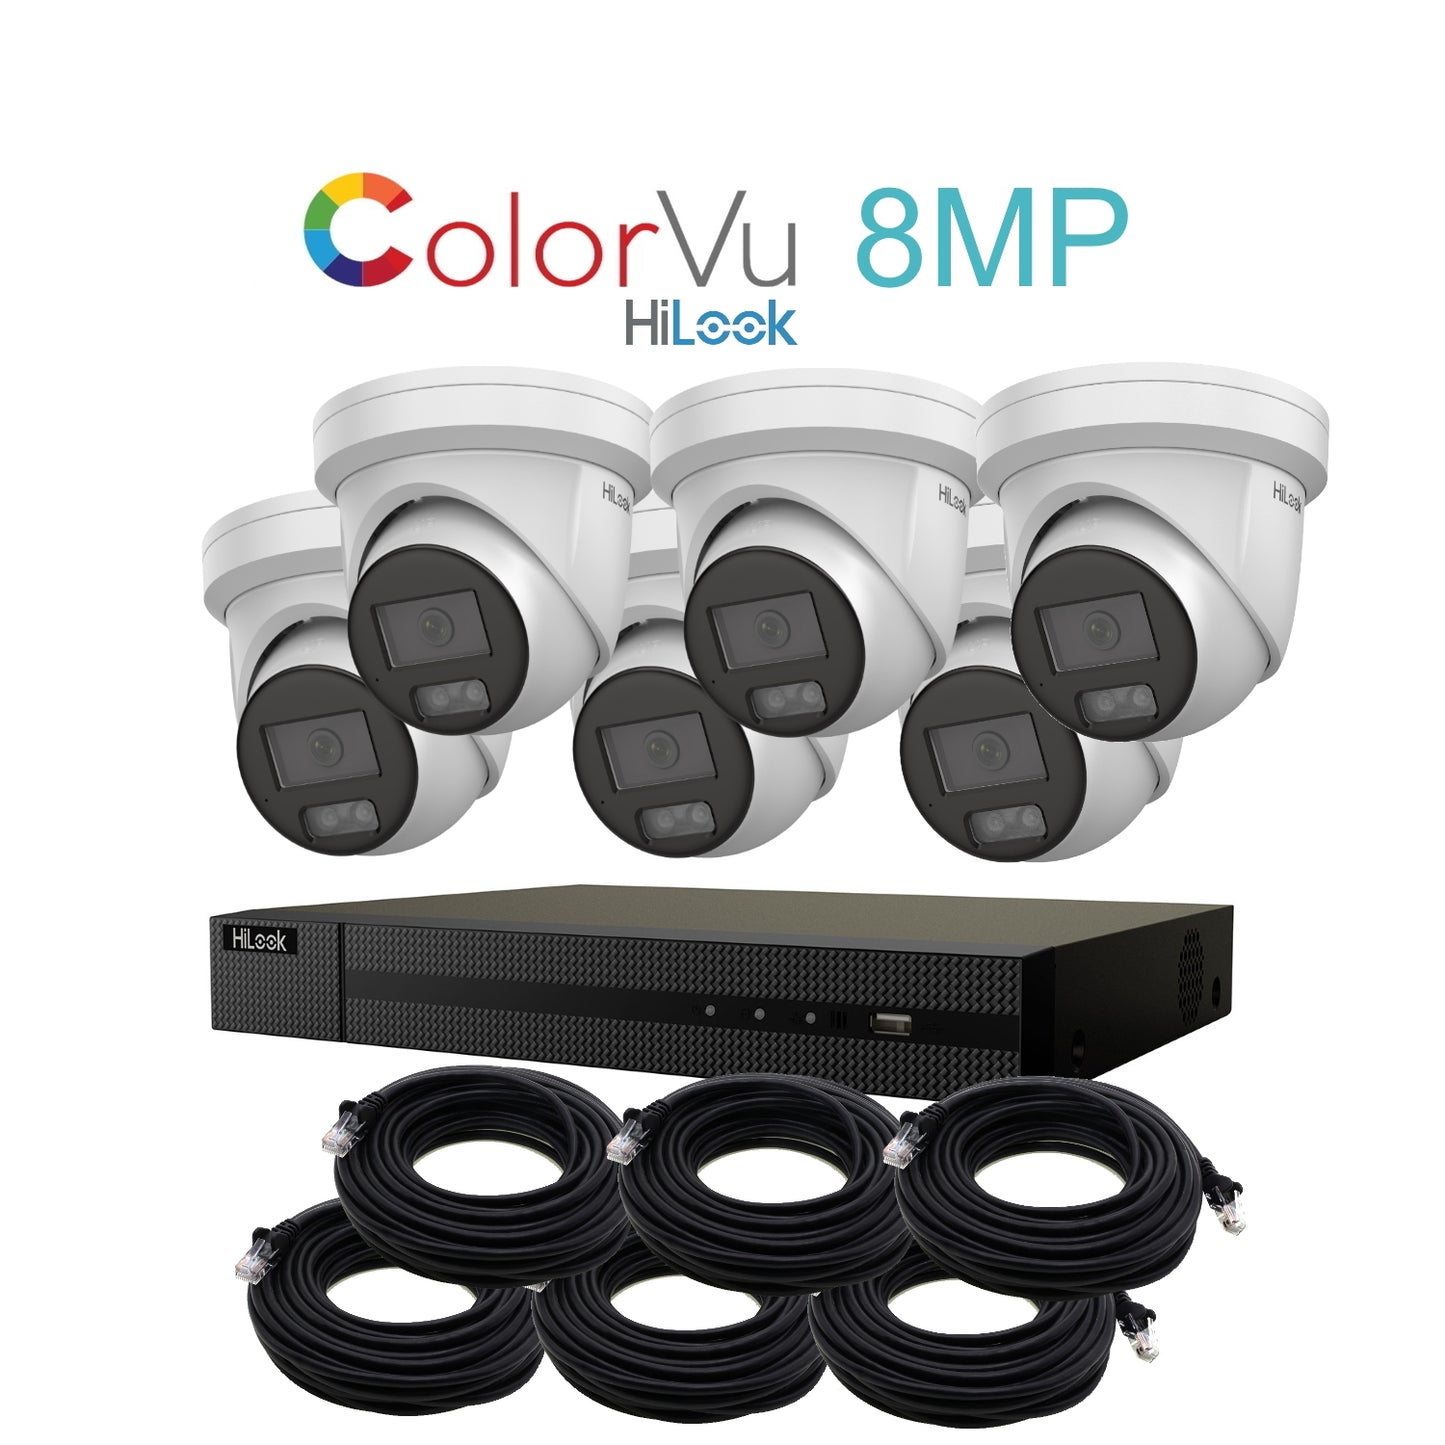 8MP 4K HiLook ColorVu IP POE CCTV Kit with 6 Cameras, Built-in Mic, 4TB HDD & Ready Made Cables